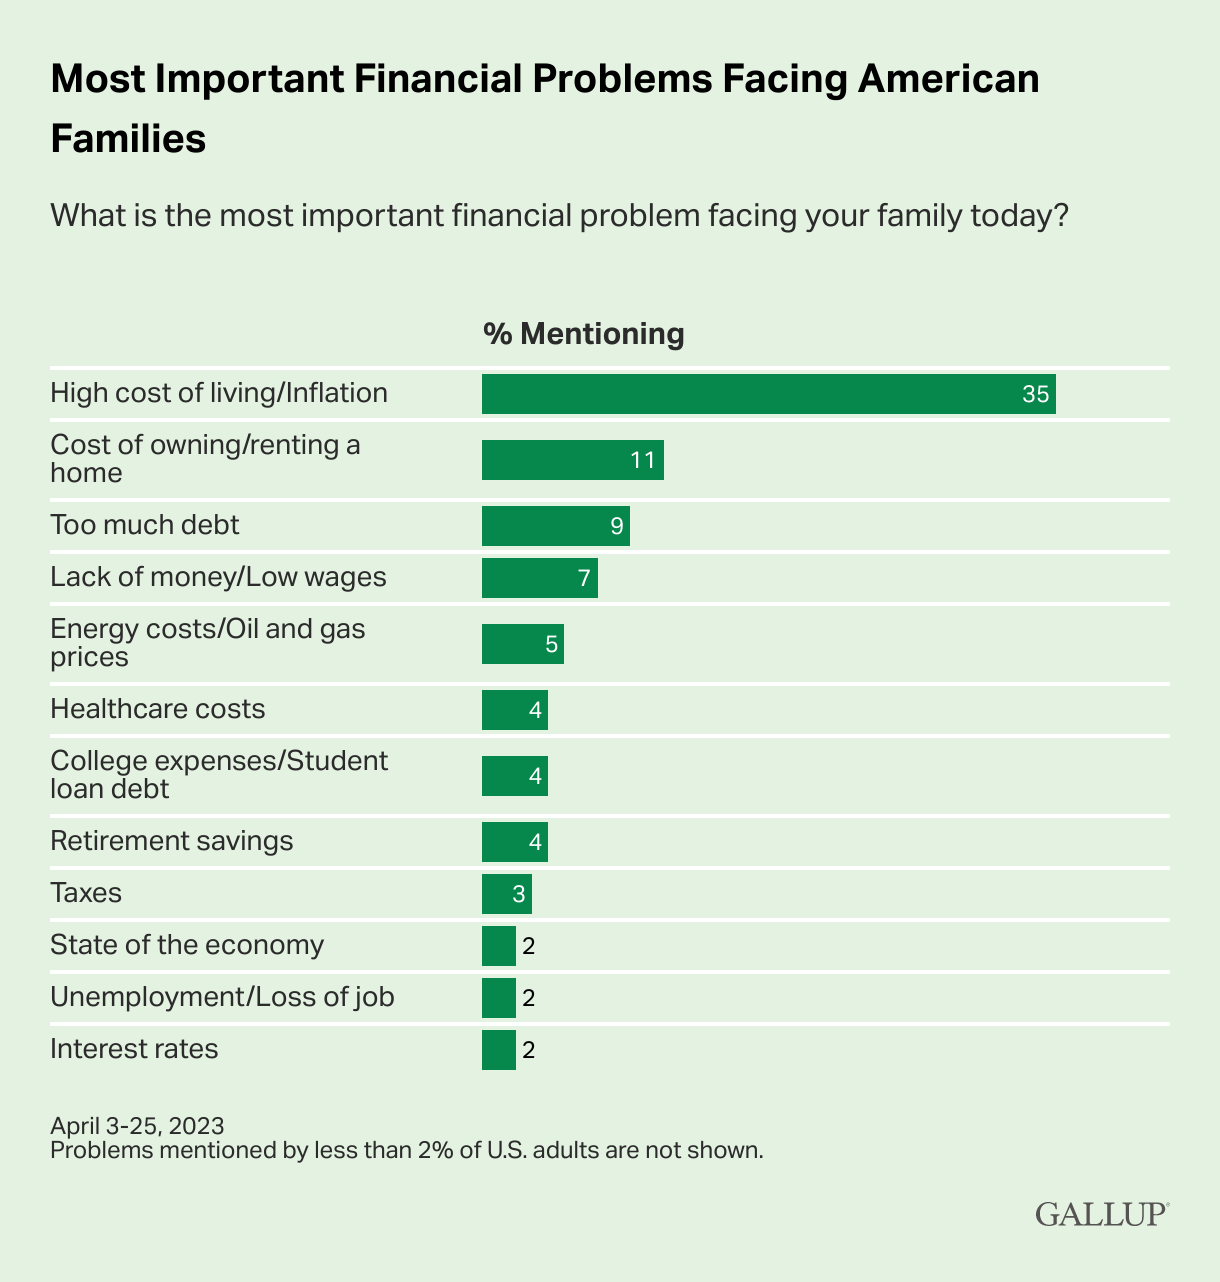 A Gallup poll shows that inflation is the top financial problem faced by most Americans in 2023 with 35% of U.S. adults naming inflation as most affecting their families. The cost of owning or renting a home (11%) ranks second, then having too much debt (9%) and a lack of money or low wages (7%) are next. Energy costs are still an issue along with healthcare costs, taxes and state of the economy.